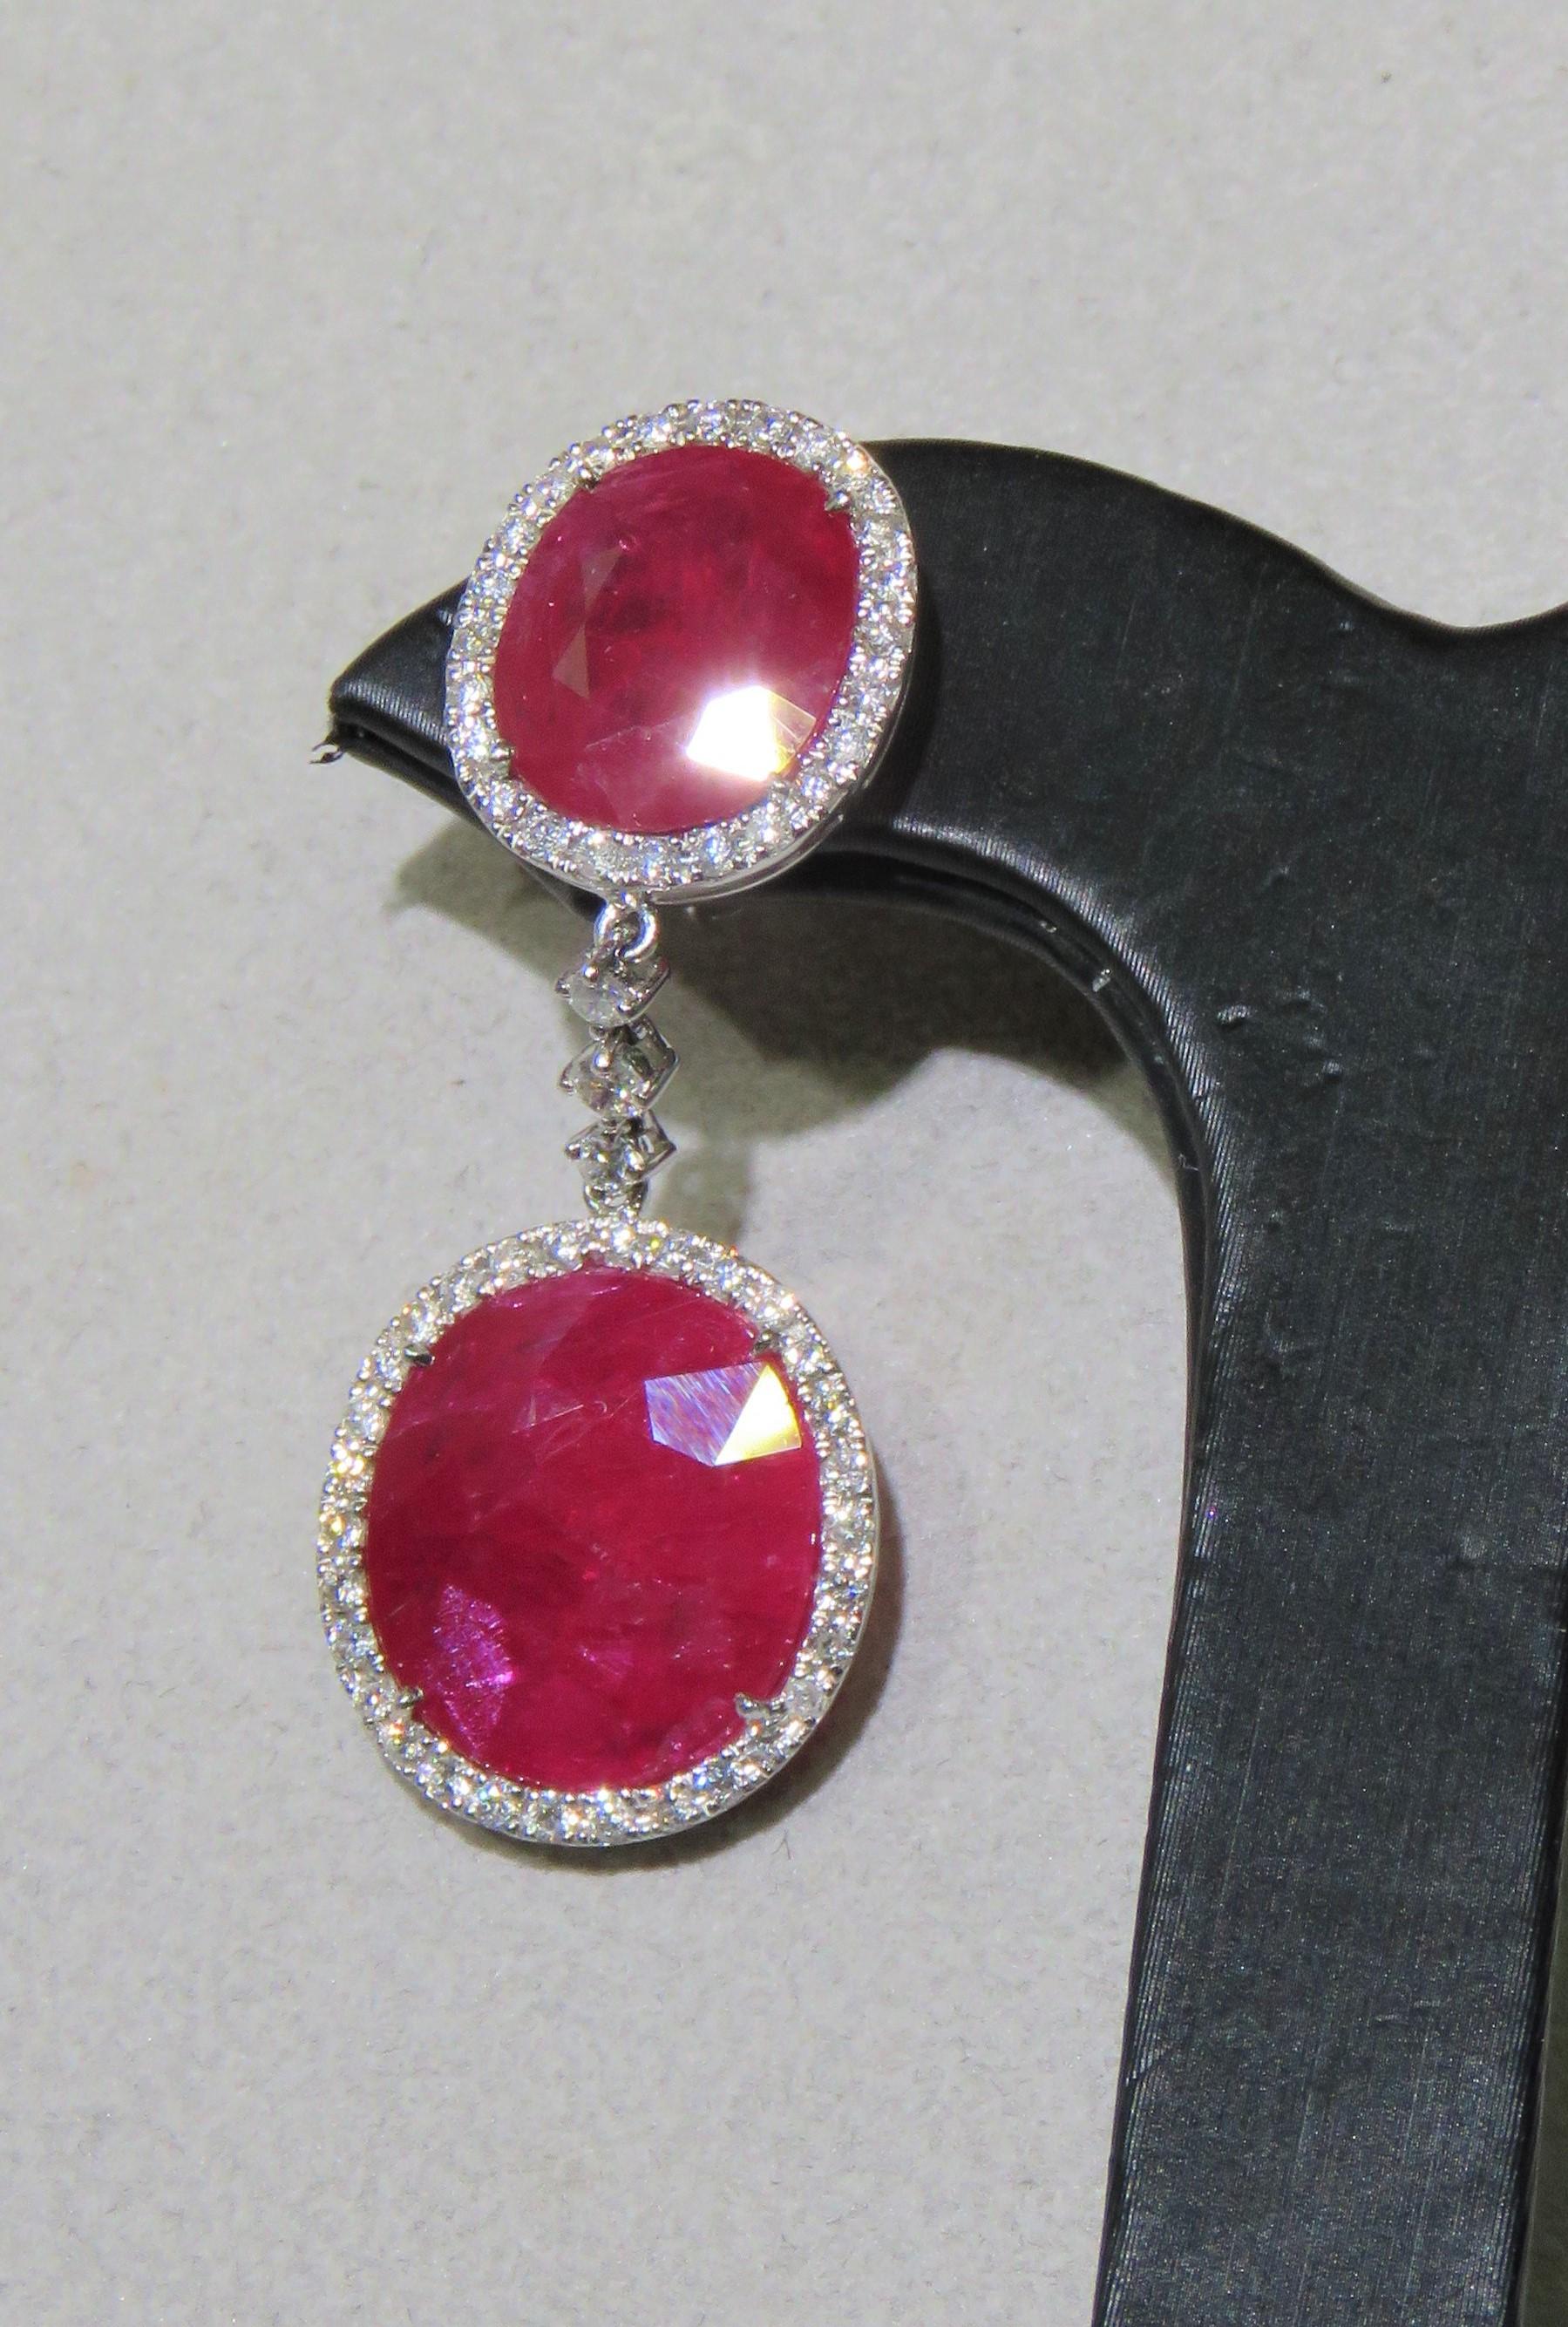 The Following Items we are offering is a Rare Important Radiant Pair of 18KT White Gold Winston Style Glistening Ruby Chandelier Drop Diamond Earrings! Magnificent Masterpieces!!! Approx T.C.W for Earrings Approx 40CTS!!!!
These Gorgeous Earrings